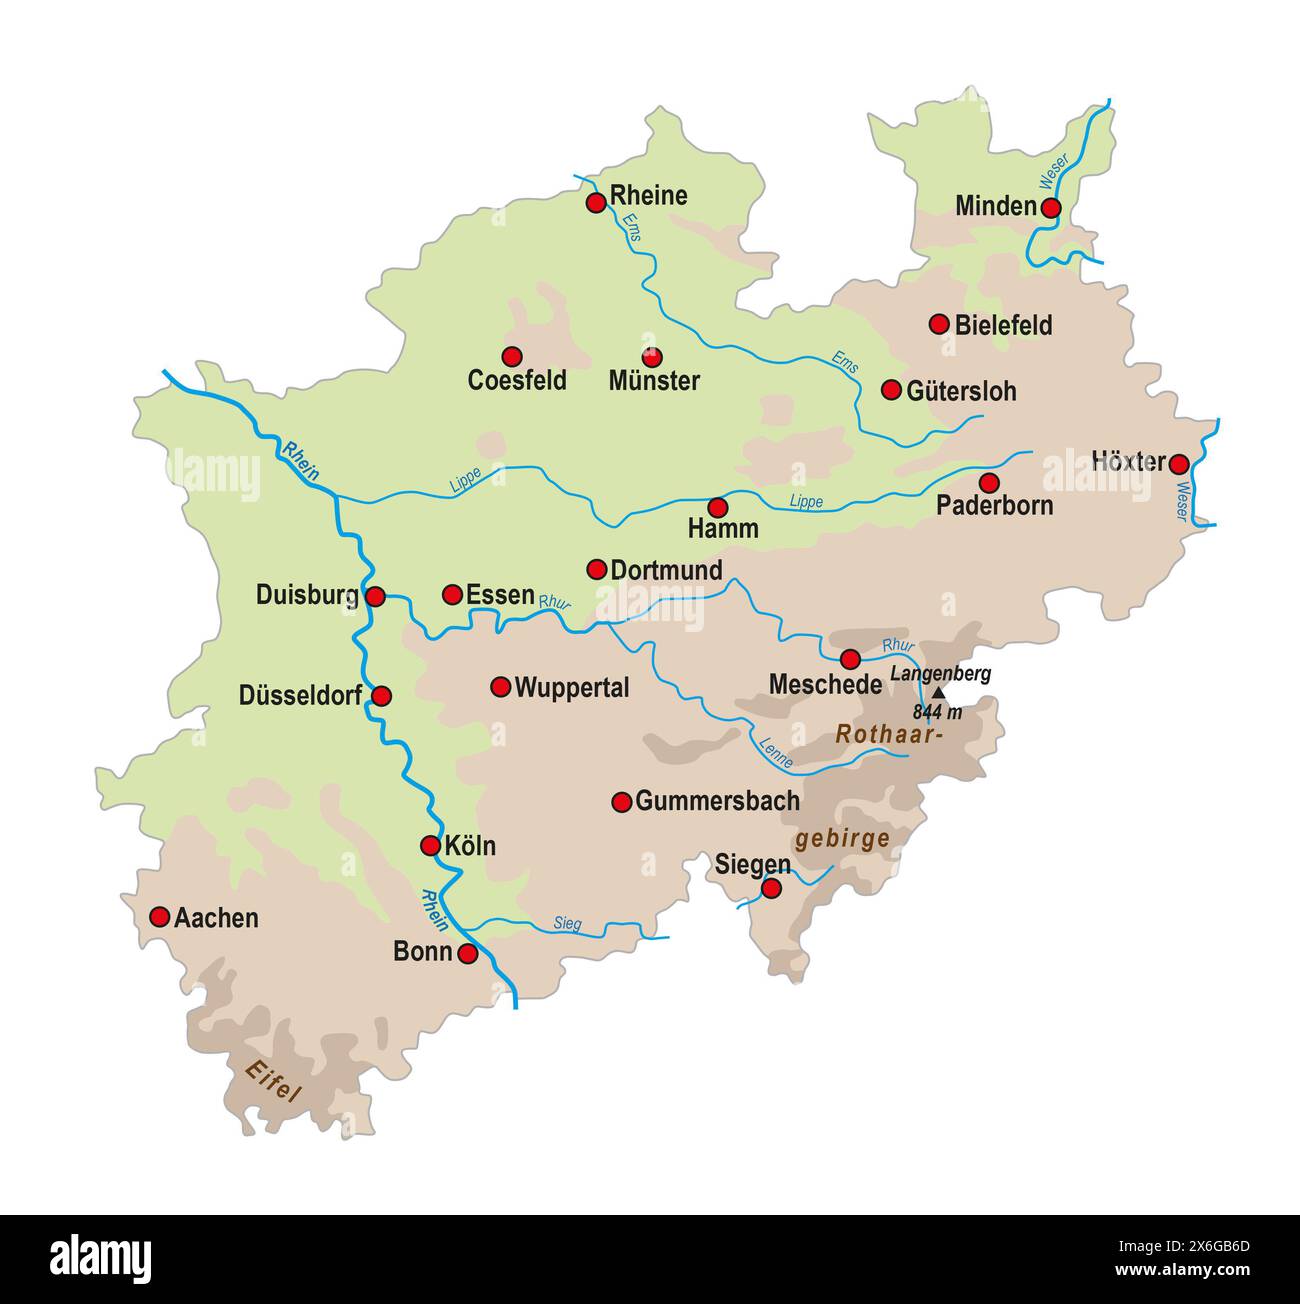 Simple overview map of North Rhine-Westphalia, Germany Stock Photo